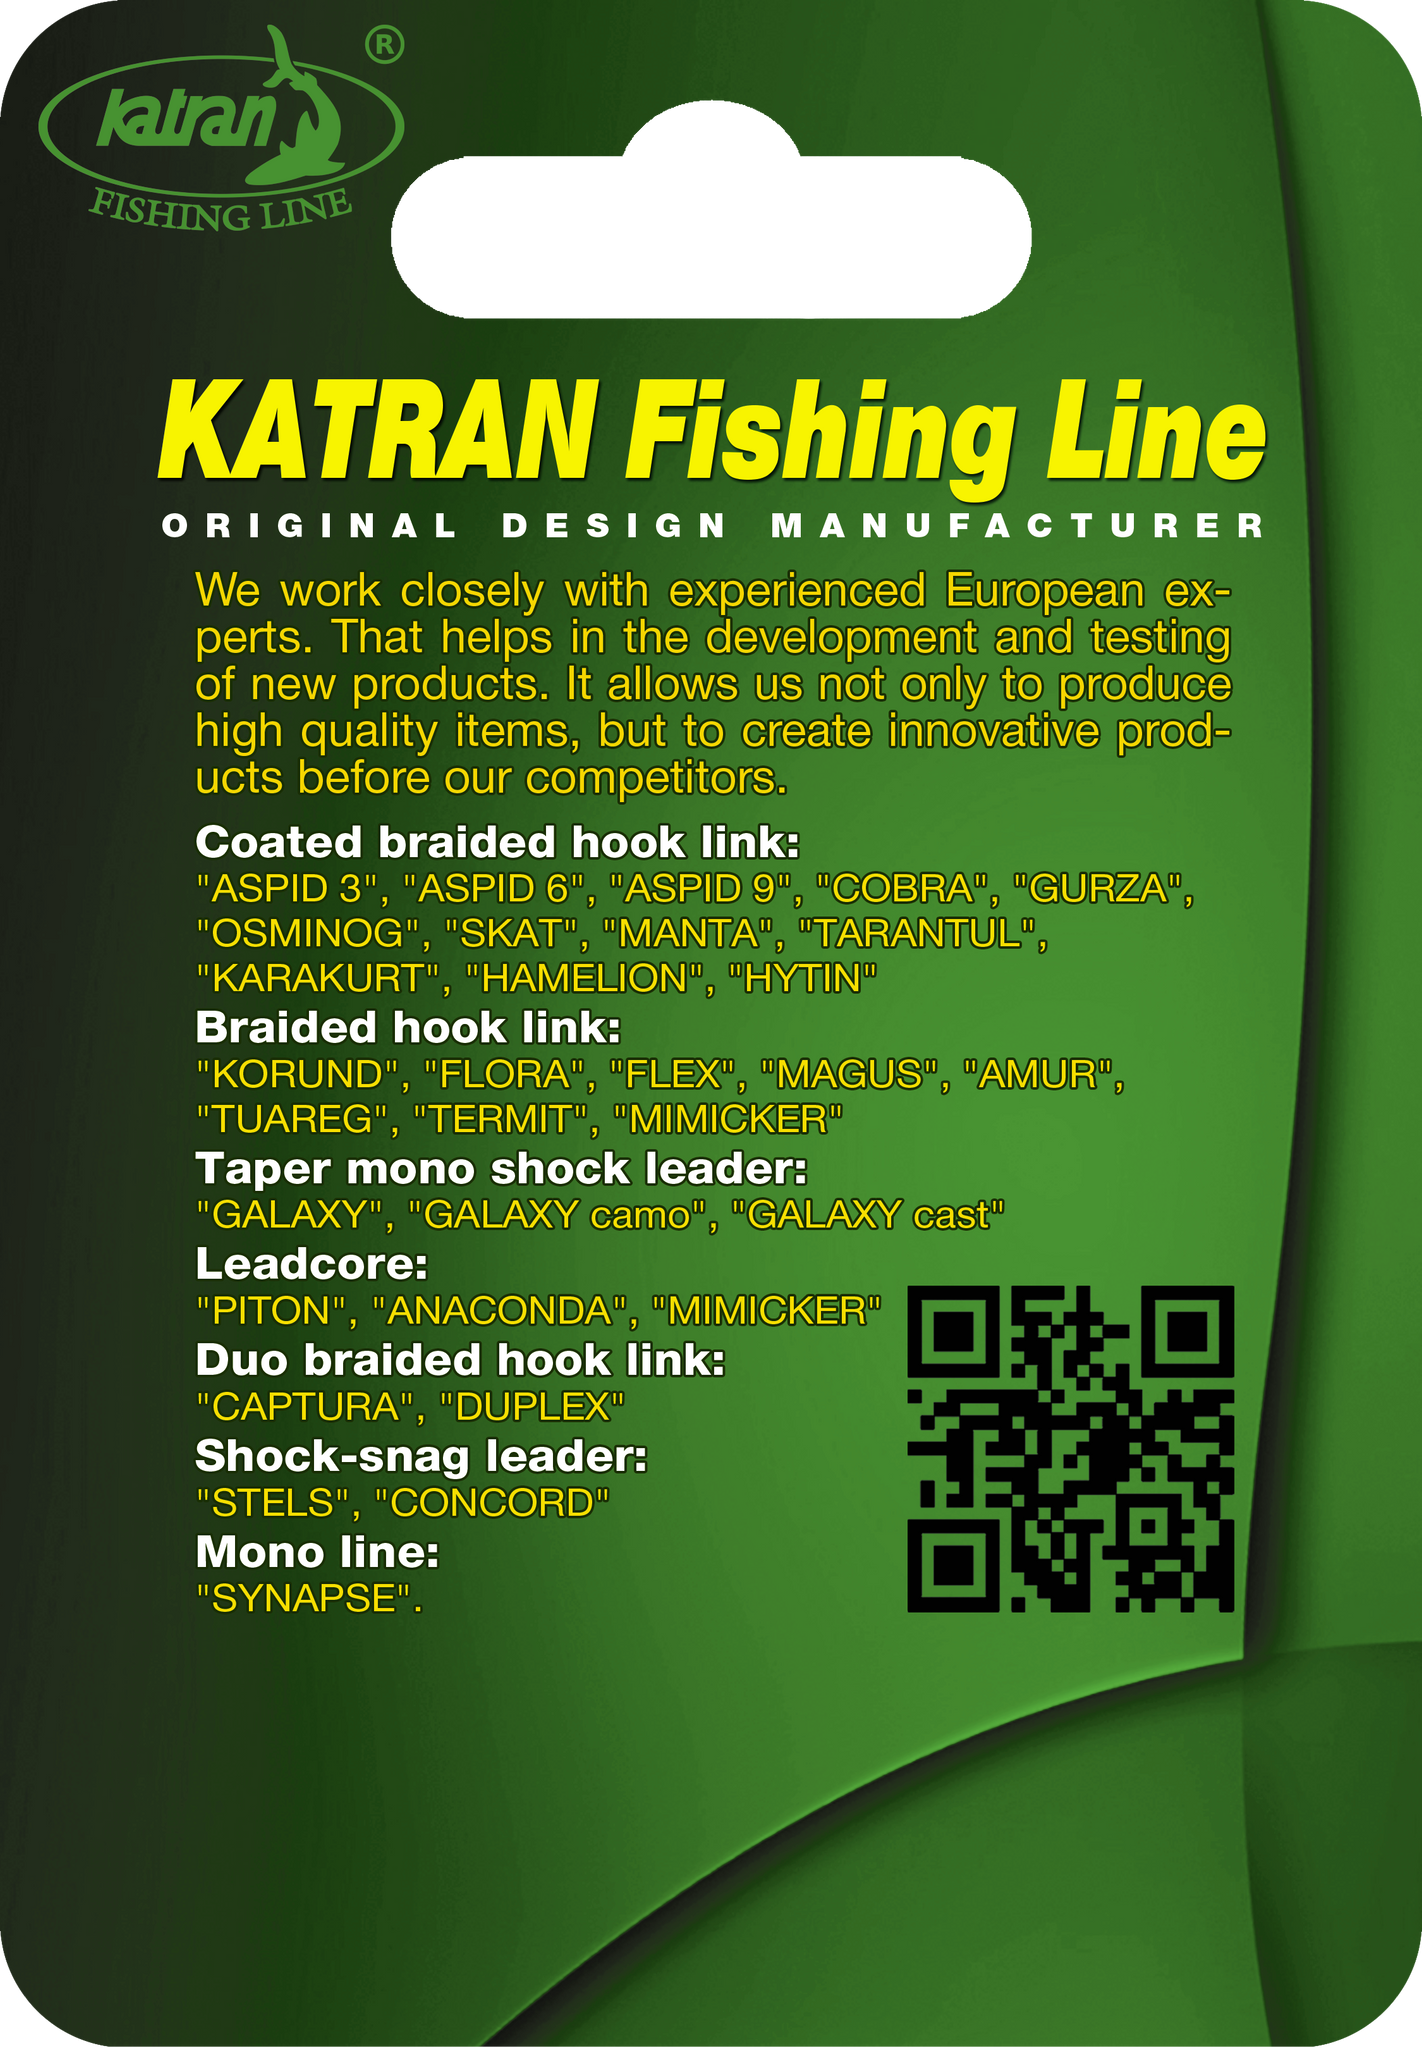 fishing line uk, fishing line uk Suppliers and Manufacturers at